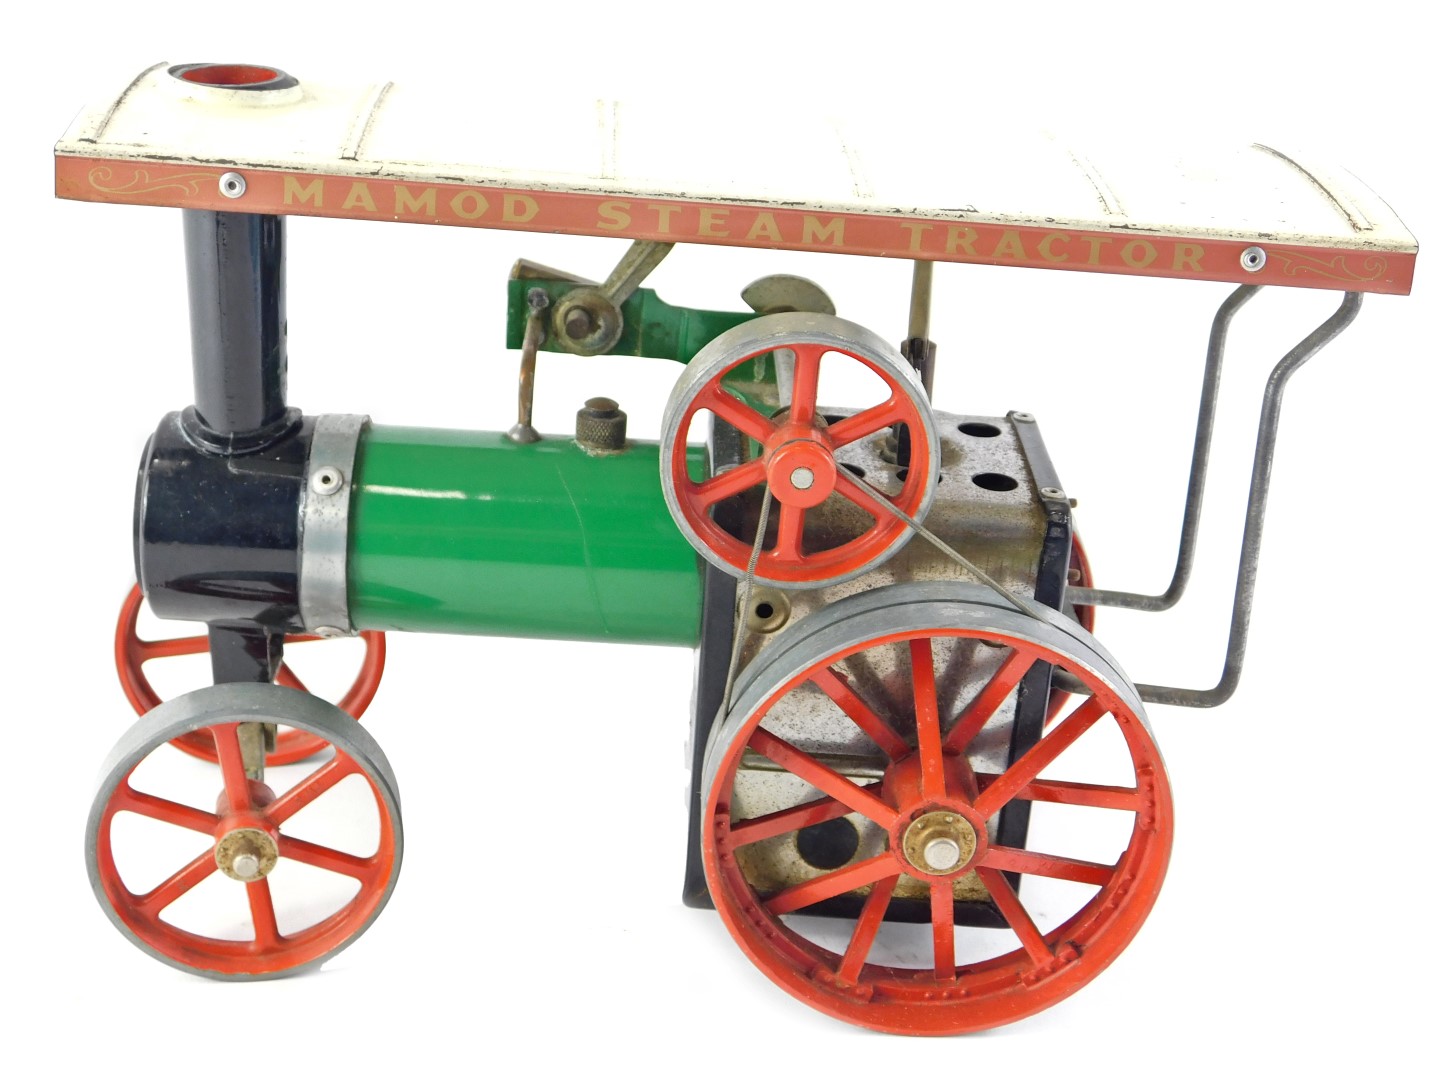 A Mamod miniature steam tractor, in green, red, and black livery, 24cm long.